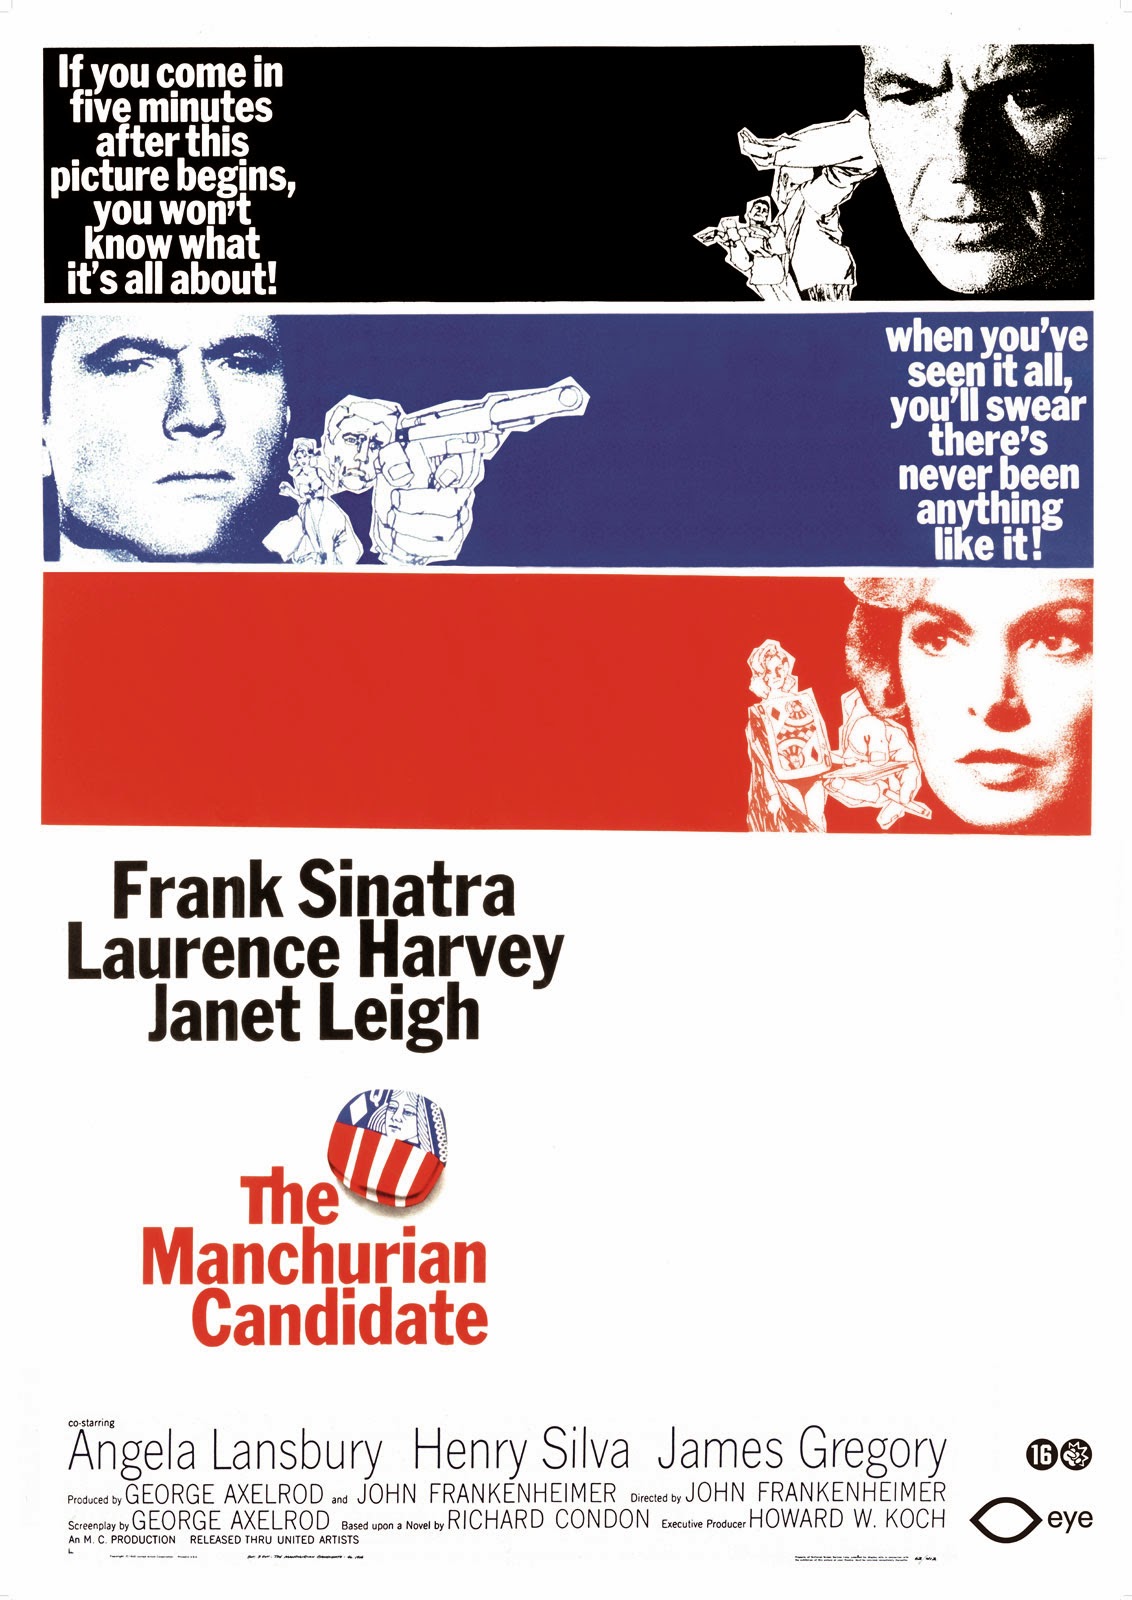 the manchurian candidate meaning